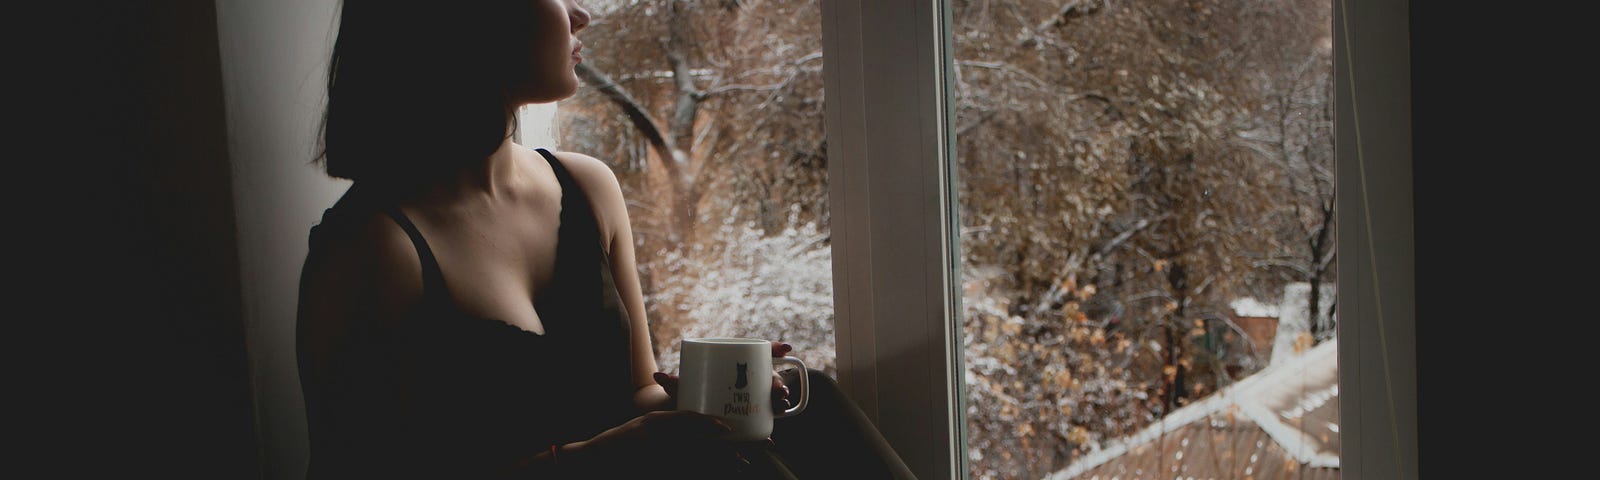 A woman holding a mug, sitting on a window seat, looking out into a snow covered landscape. She is silhouetted in darkness.